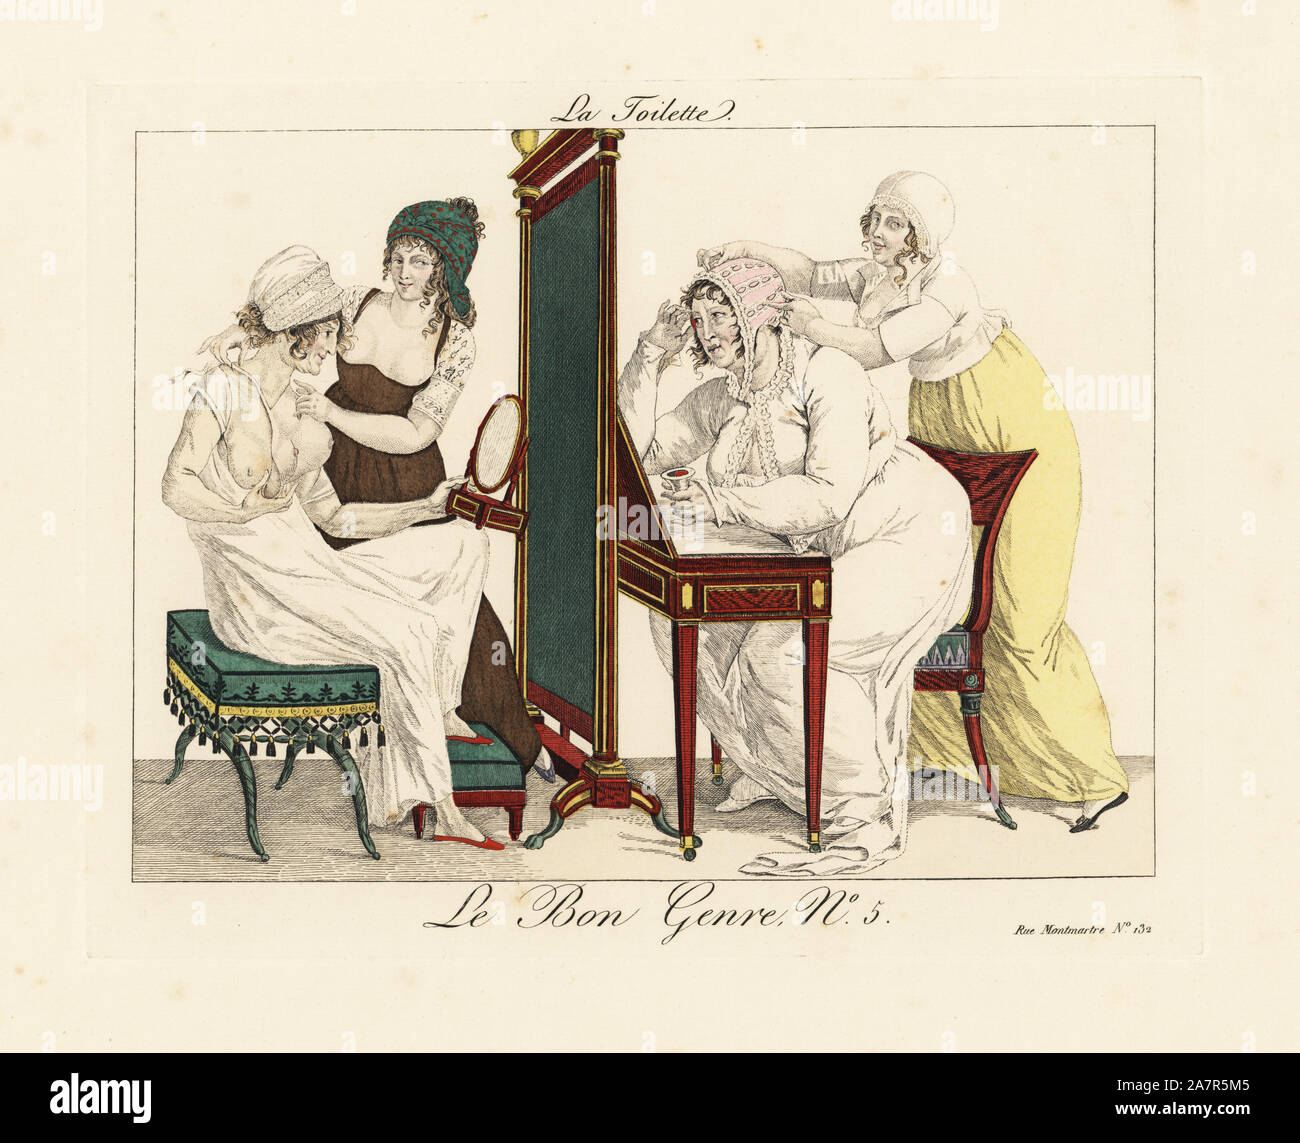 La toilette: Two young women help older women with baby bonnets and false bosoms - while giving knowing looks to the viewer. 'Women of 19 and 20 are in open war with women of a certain age (30). They adopt fashions that suit only them, such as flat bonnets and childish caps.' Handcoloured engraving from Pierre de la Mesangere's Le Bon Genre, Paris, 1817. Stock Photo